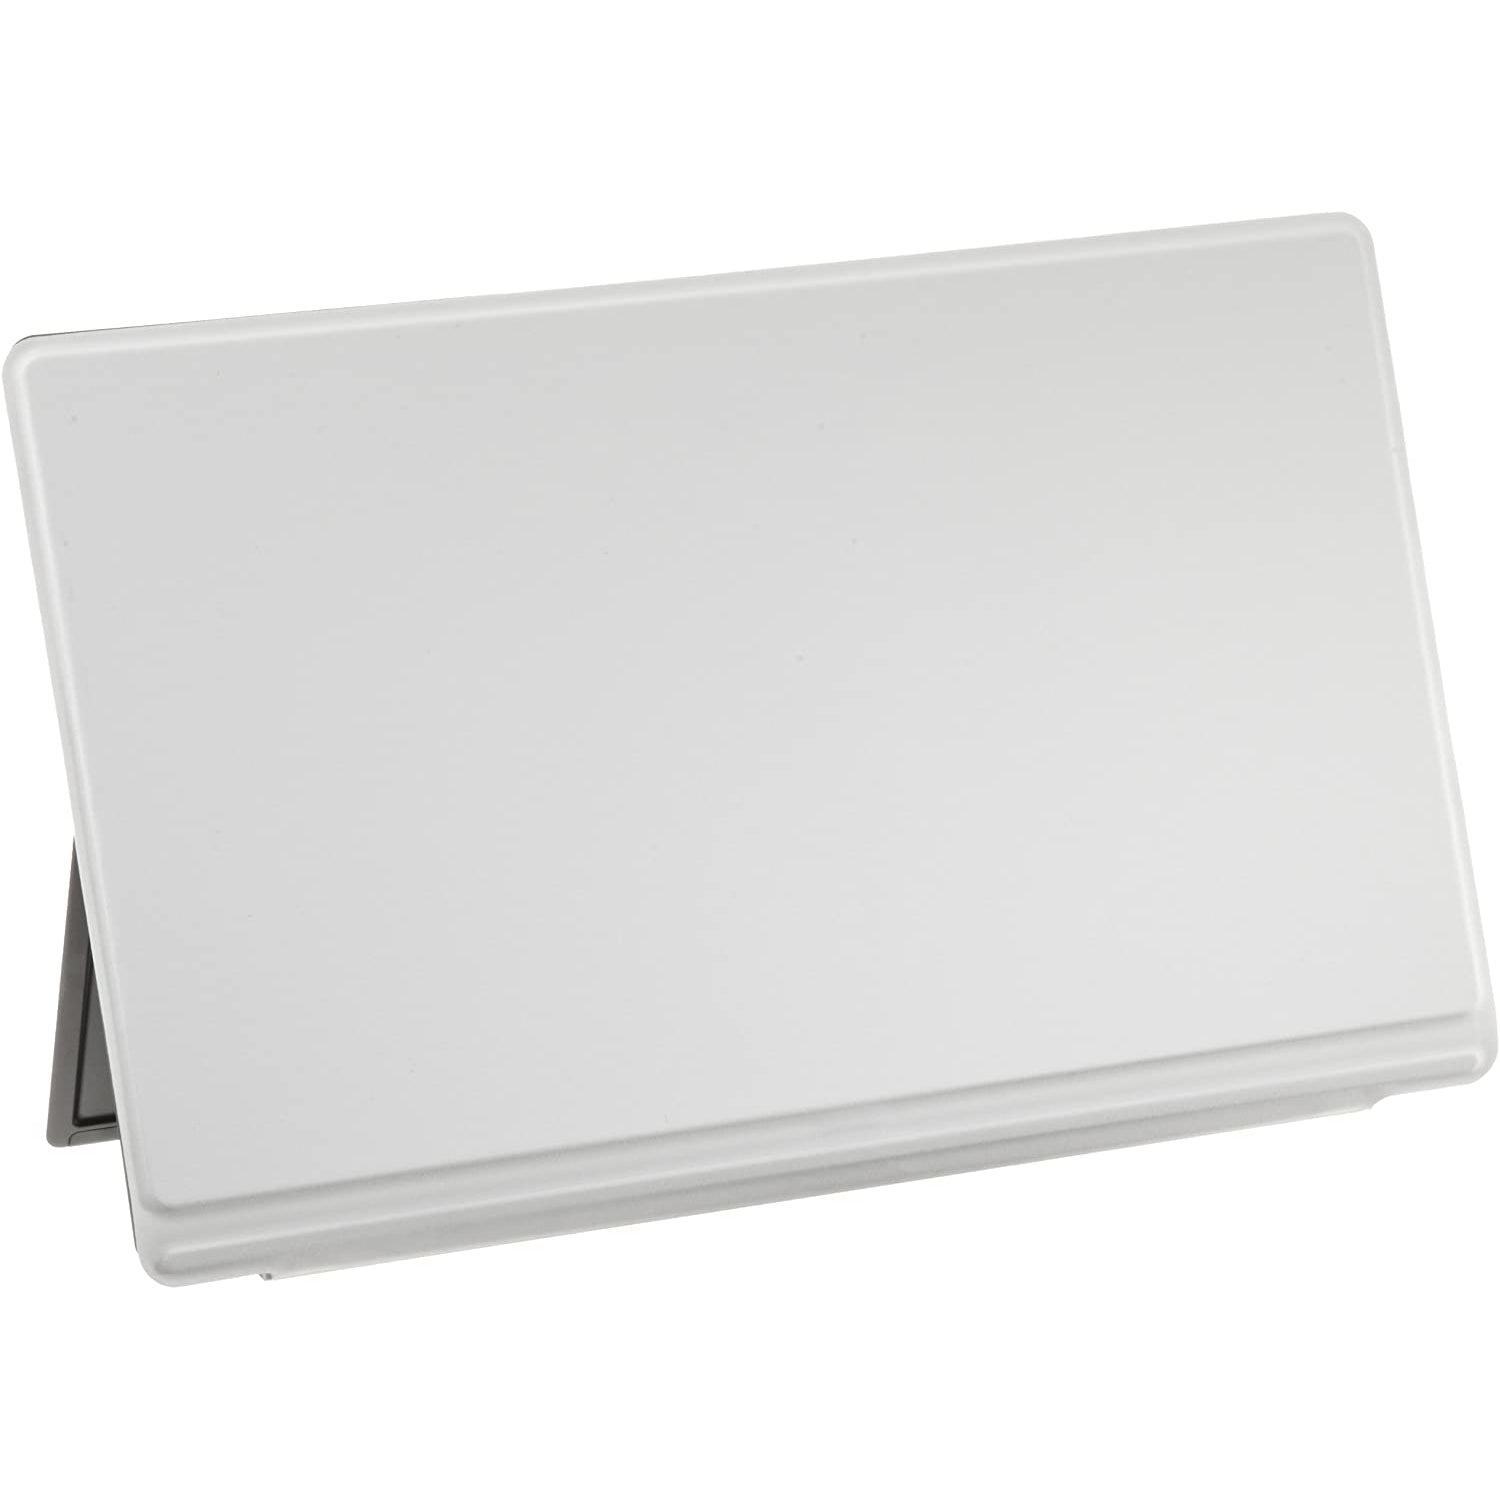 Microsoft Surface Touch Cover for Microsoft Surface - White - Refurbished Excellent